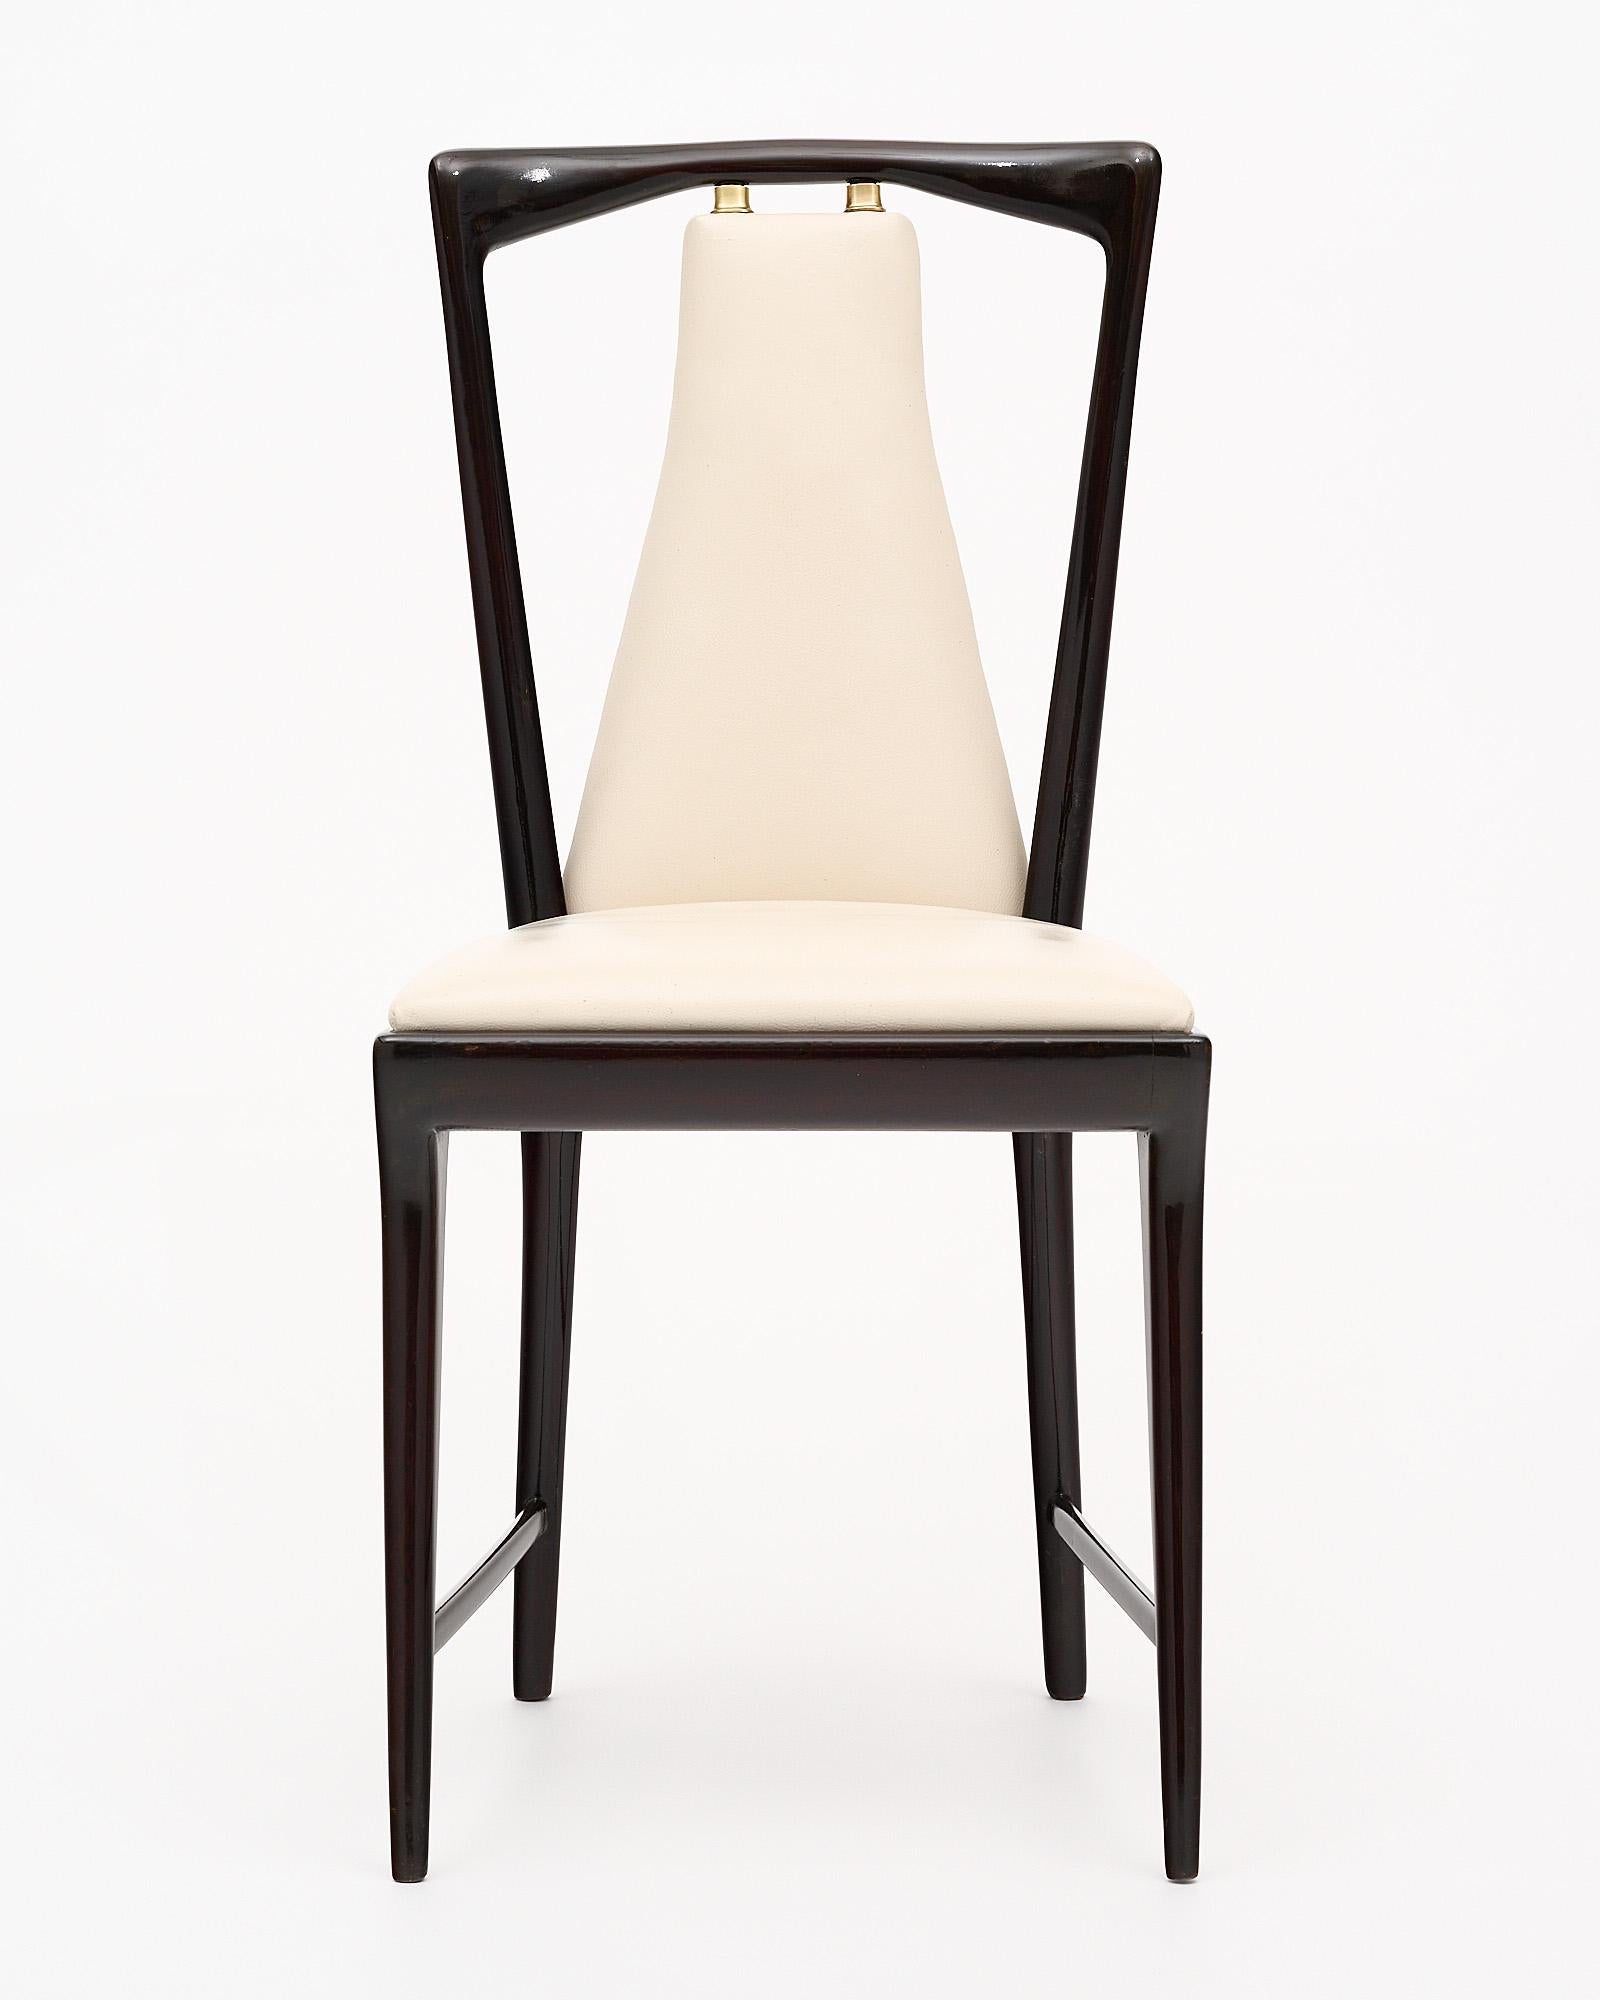 Set of 8 dining chairs from the Italian Modernist period by iconic designer Osvaldo Borsani. Made of French polished mahogany, these stylish and comfortable chairs feature their original vinyl upholstery and gilt brass accents.